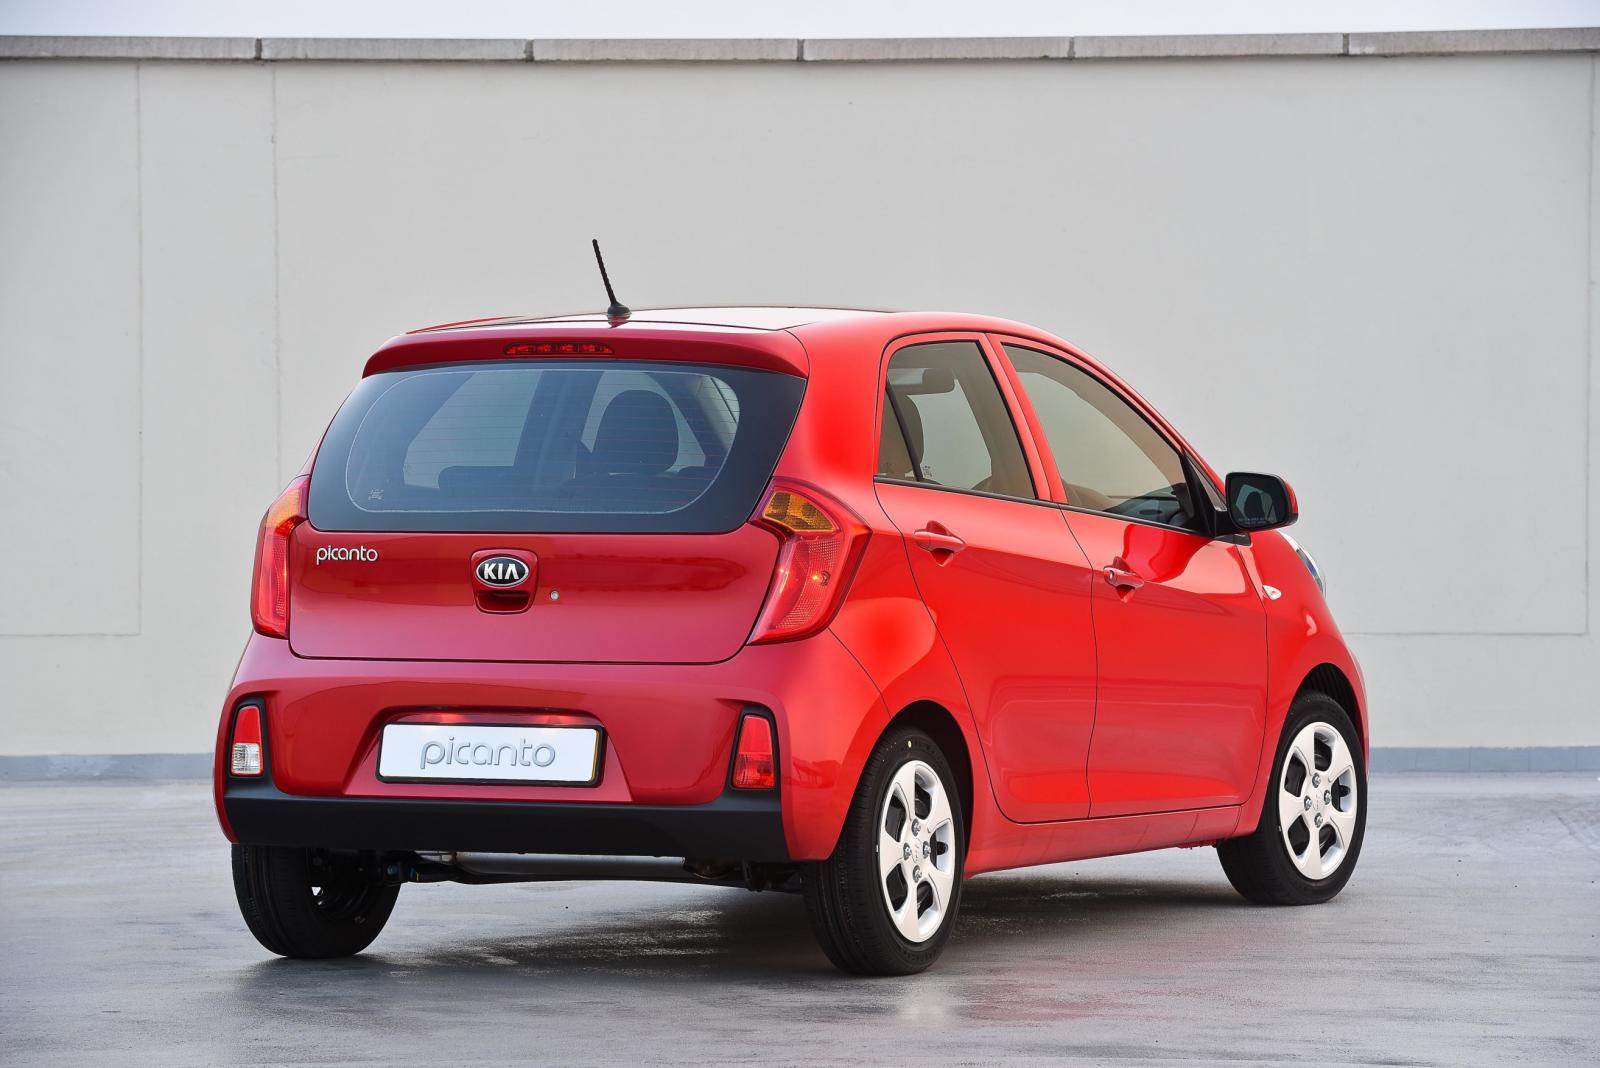 Kia Picanto 1.2 LS rear three quarter launched in South Africa